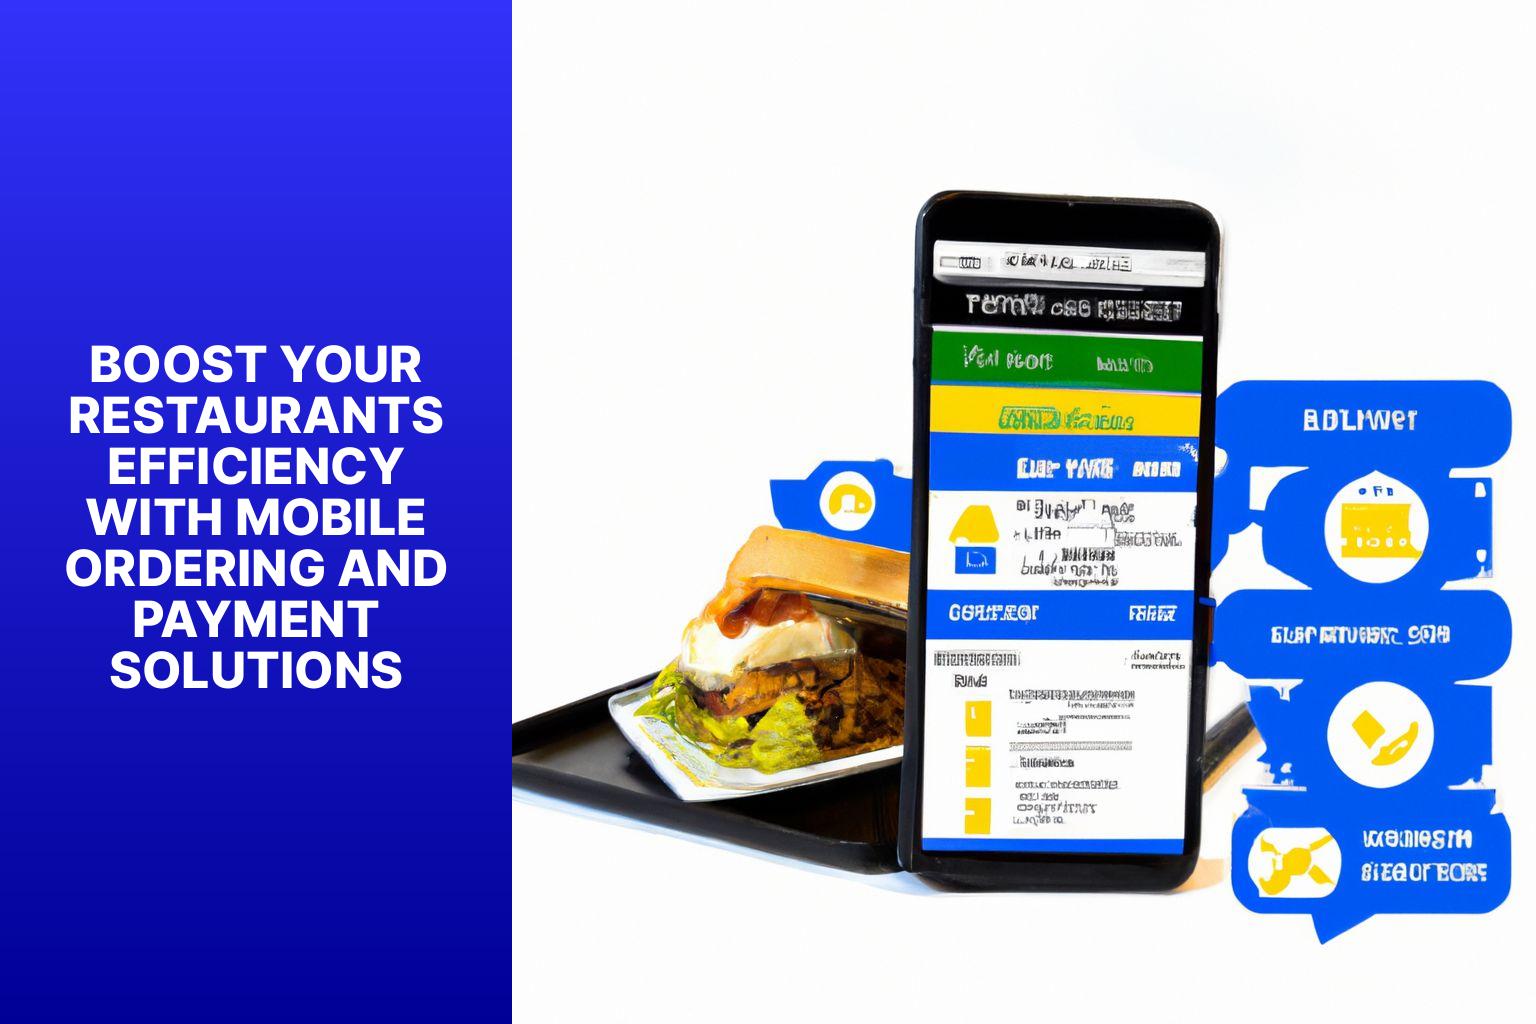 Boost Your Restaurants Efficiency with Mobile Ordering and Payment Solutions